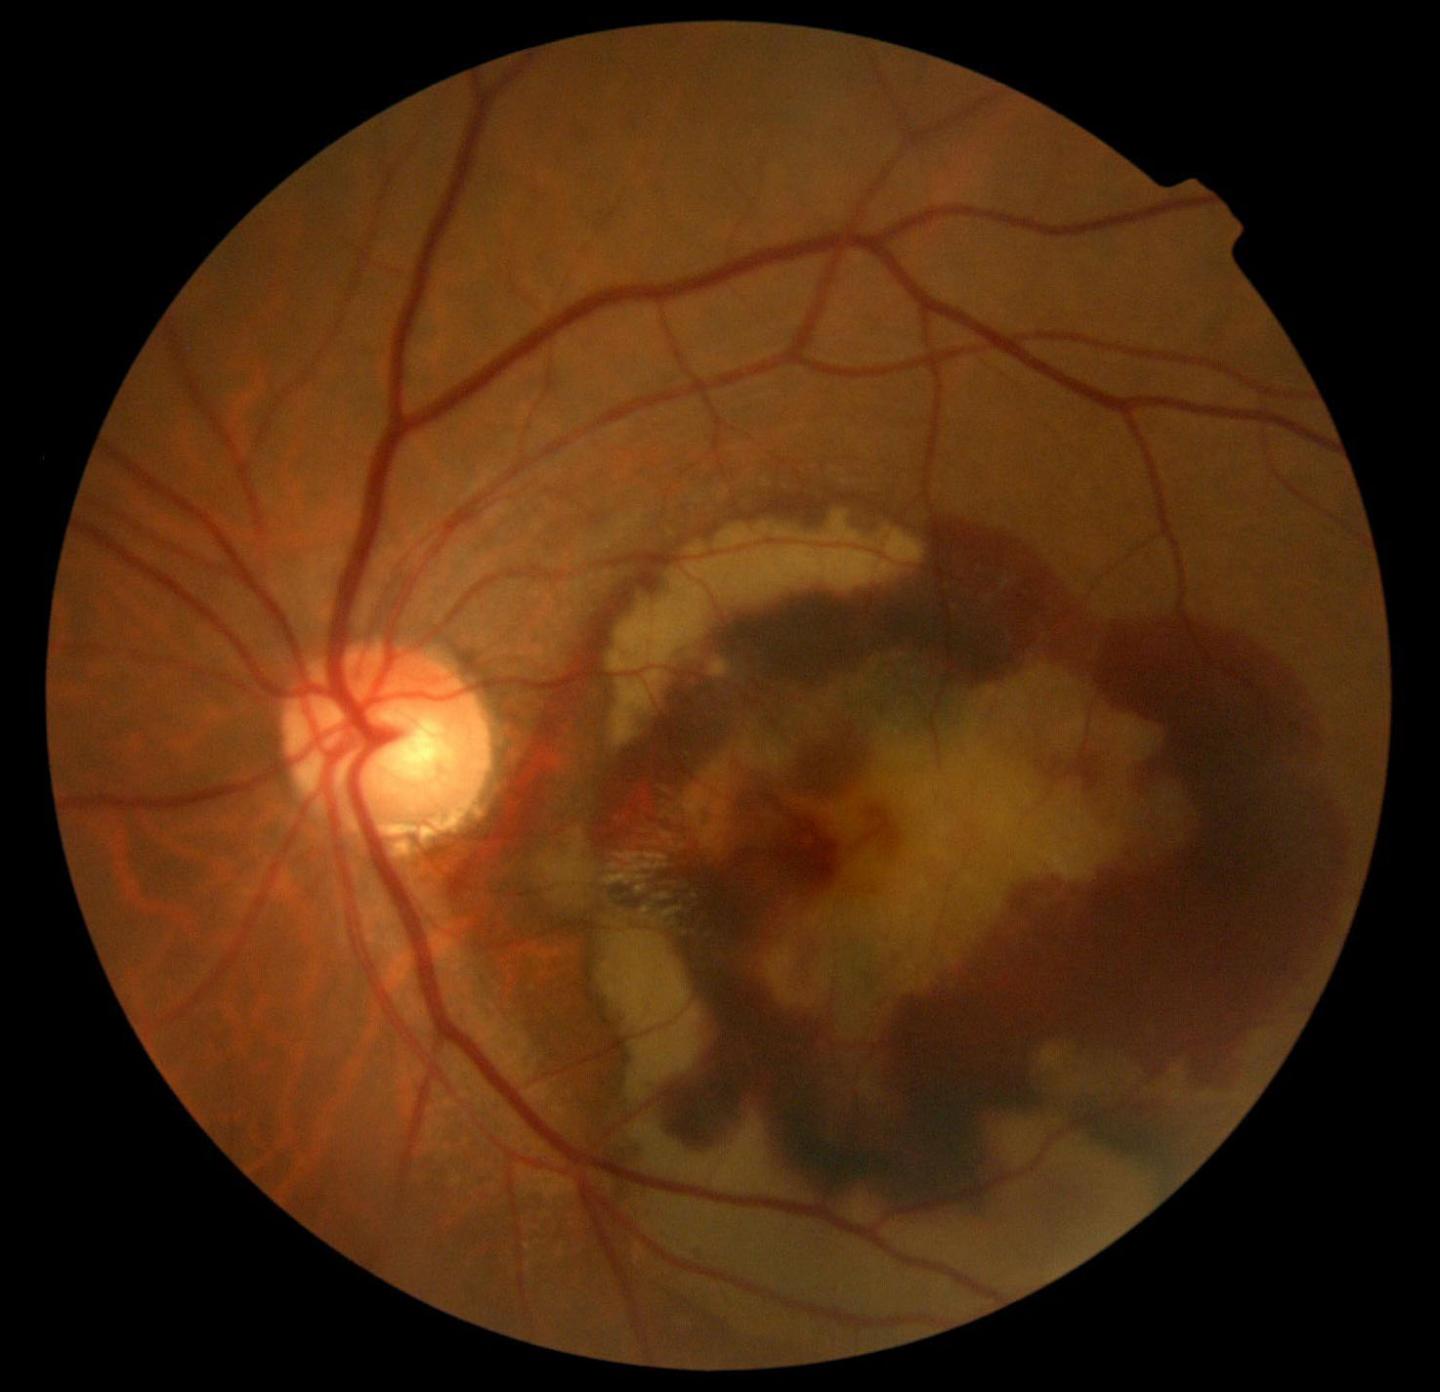 Reproducing a Retinal Disease on a Chip